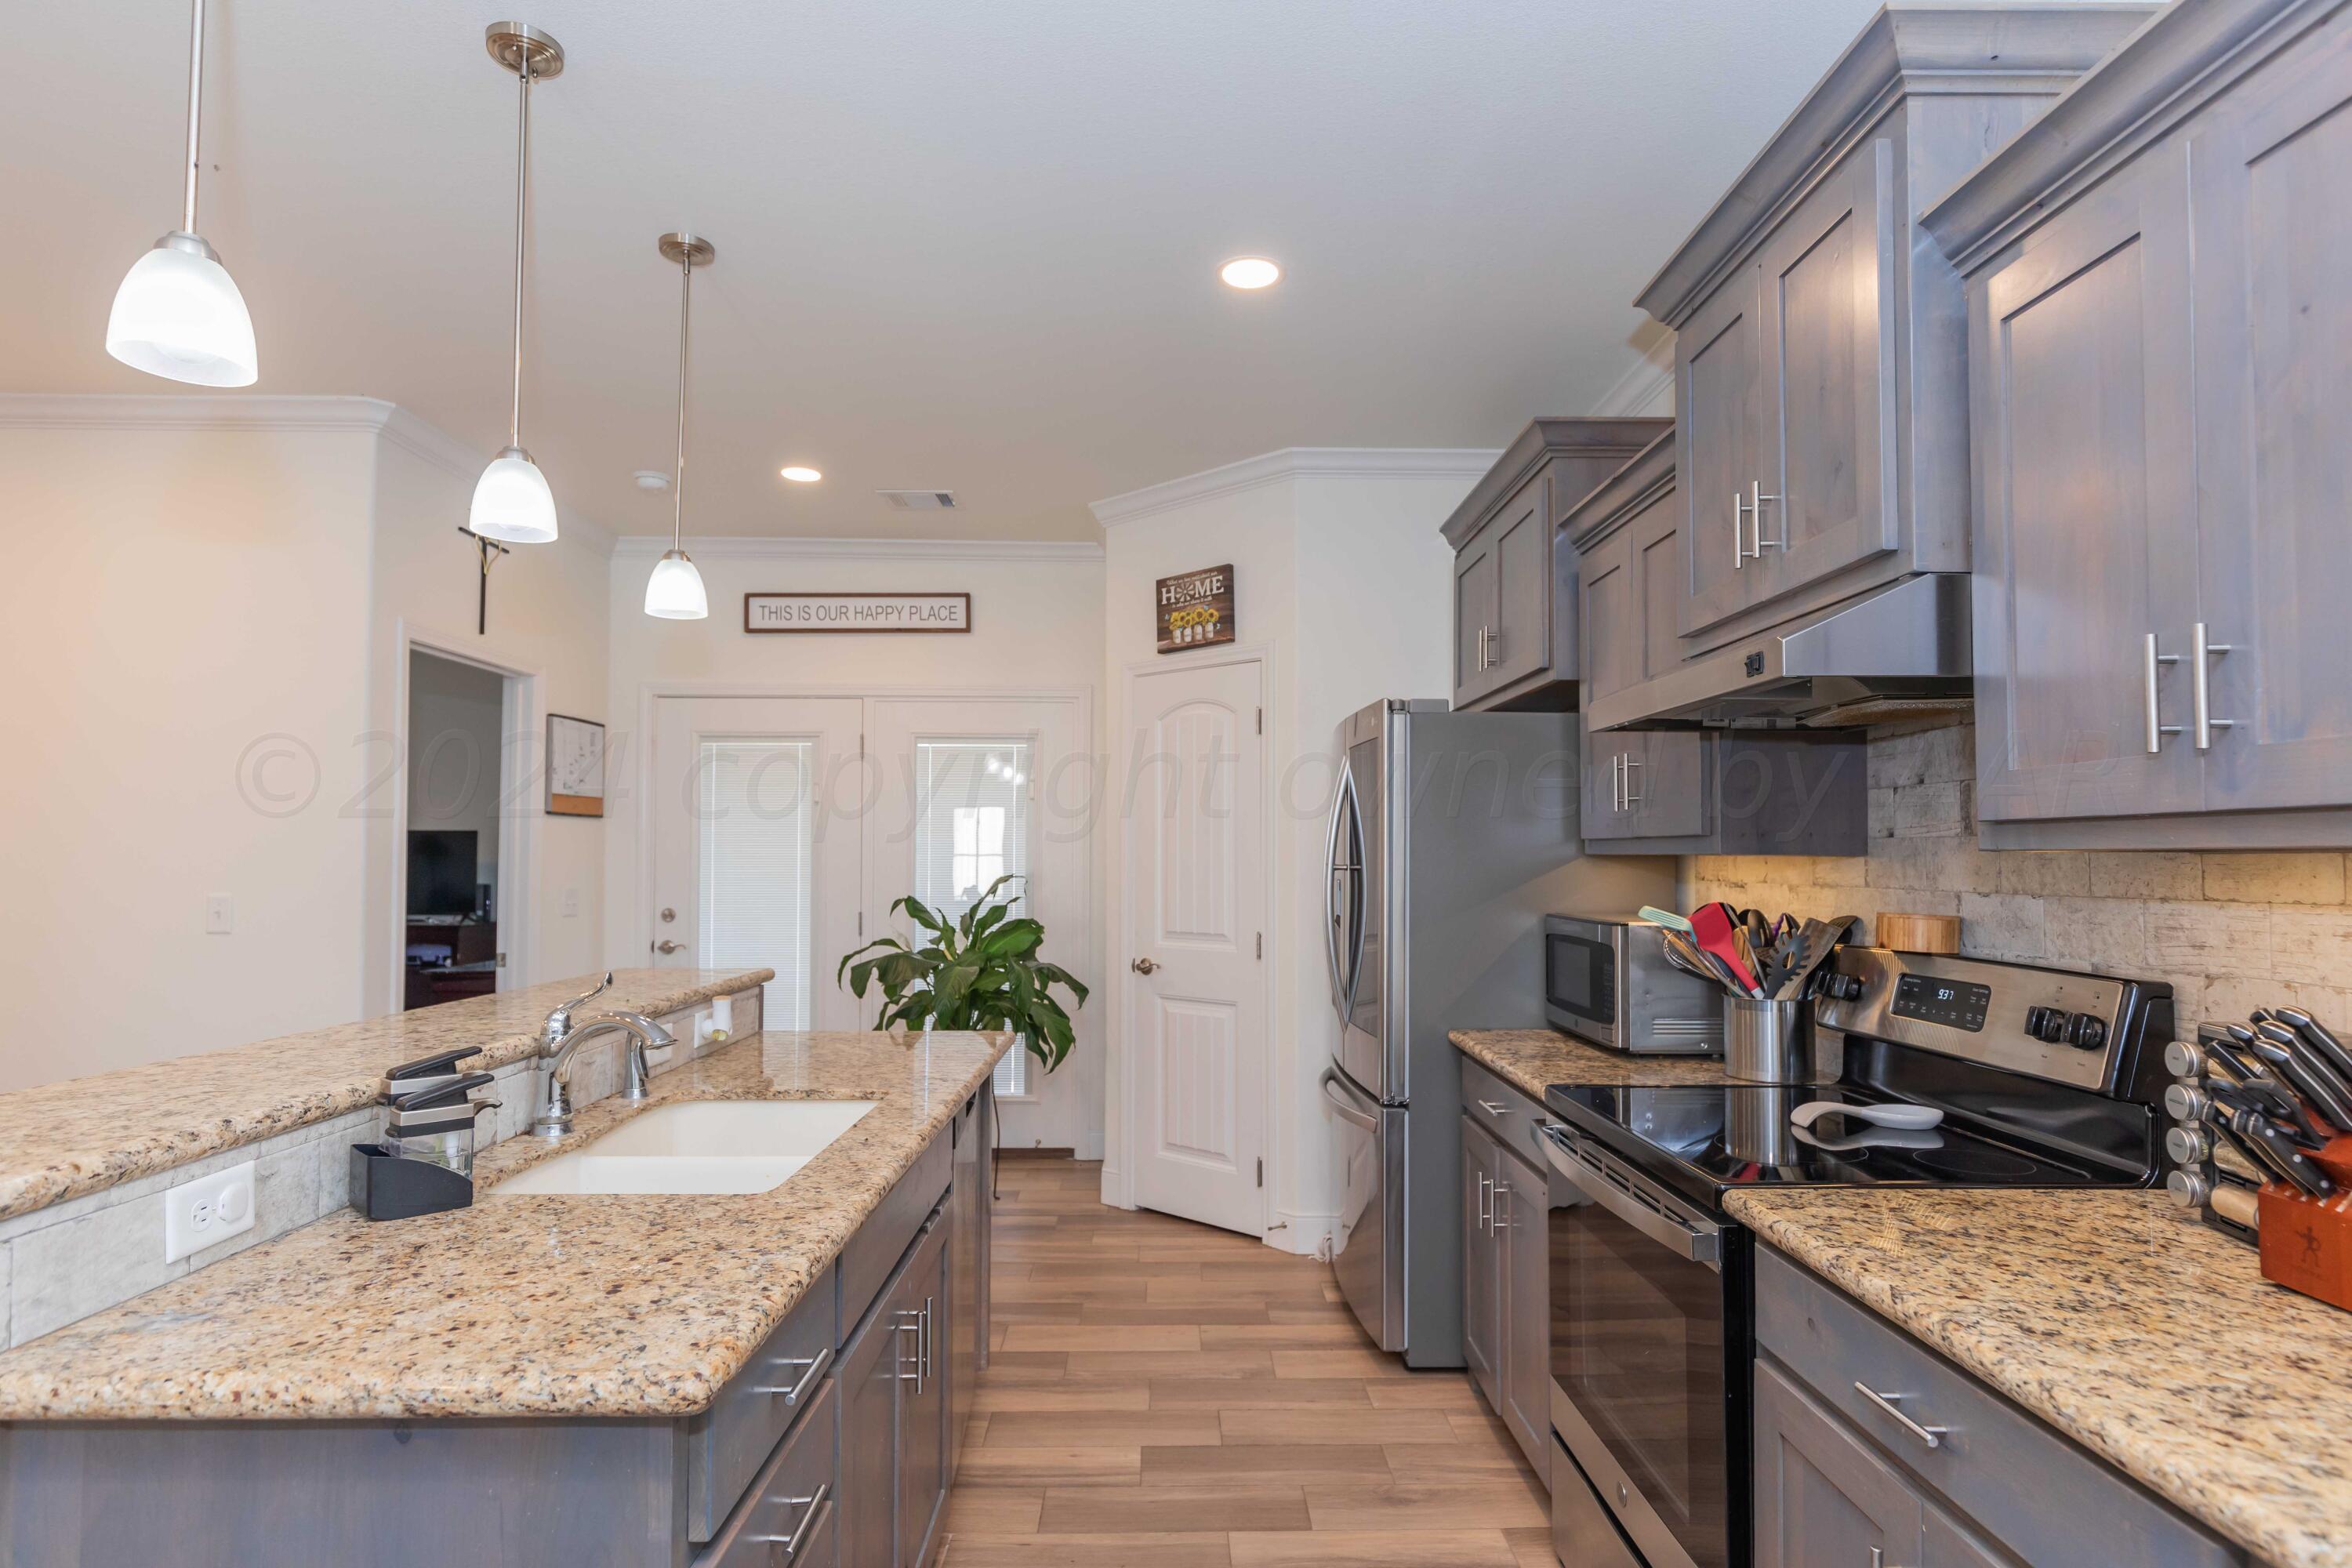 a kitchen with granite countertop kitchen island stainless steel appliances a sink stove top oven and cabinets